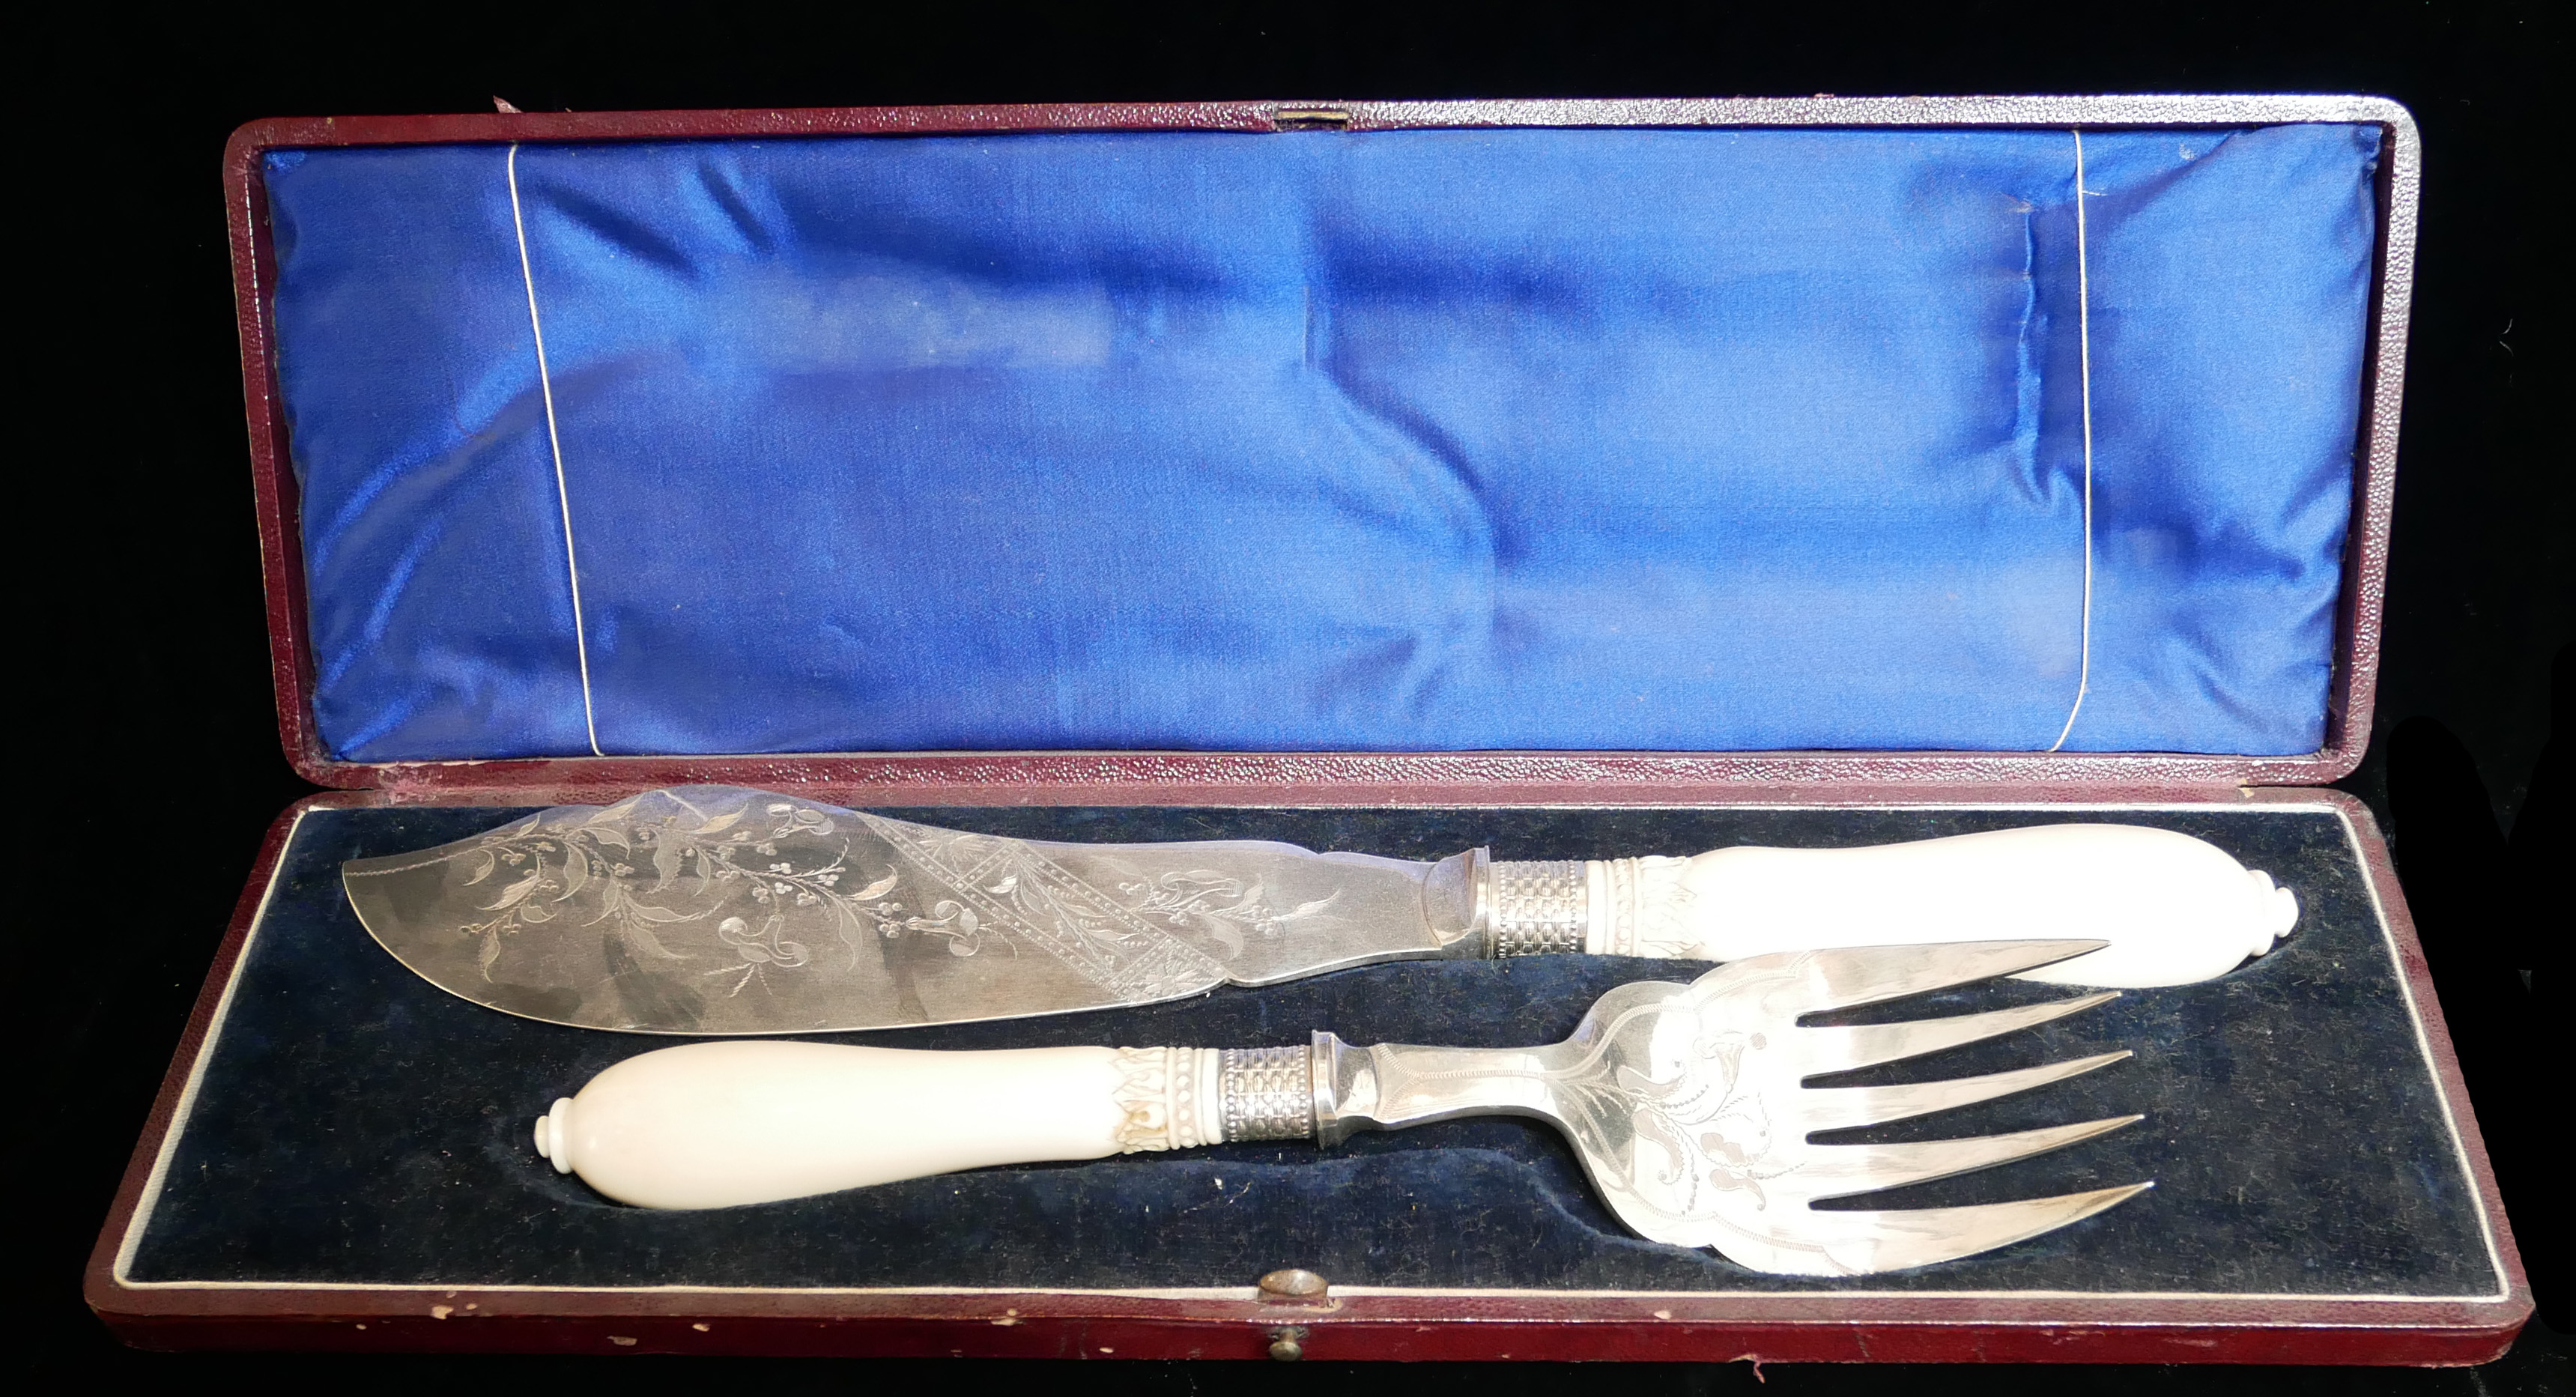 A CASED PAIR OF VICTORIAN SILVER PLATE AND IVORY FISH SERVERS Aesthetic form with engraved floral